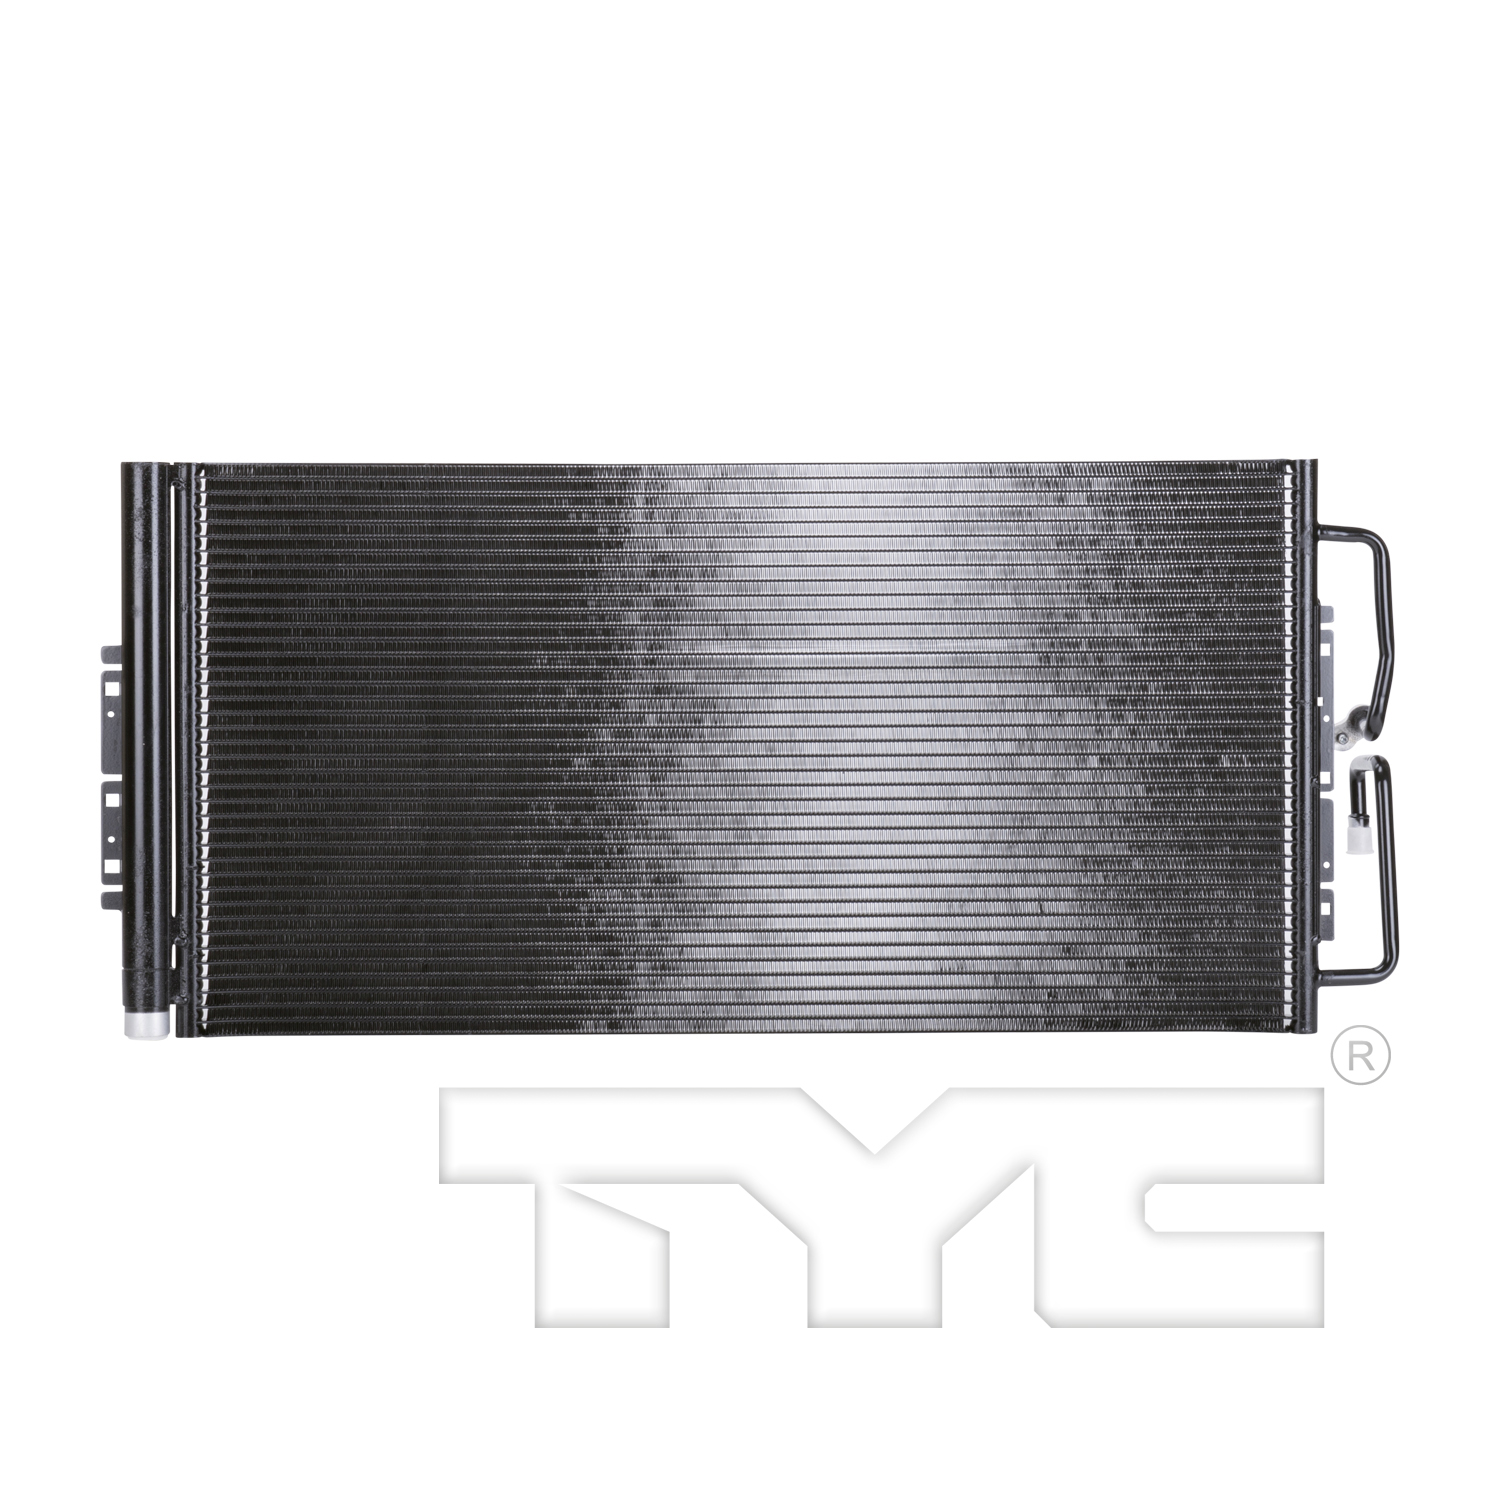 Aftermarket AC CONDENSERS for CHEVROLET - IMPALA, IMPALA,06-11,Air conditioning condenser